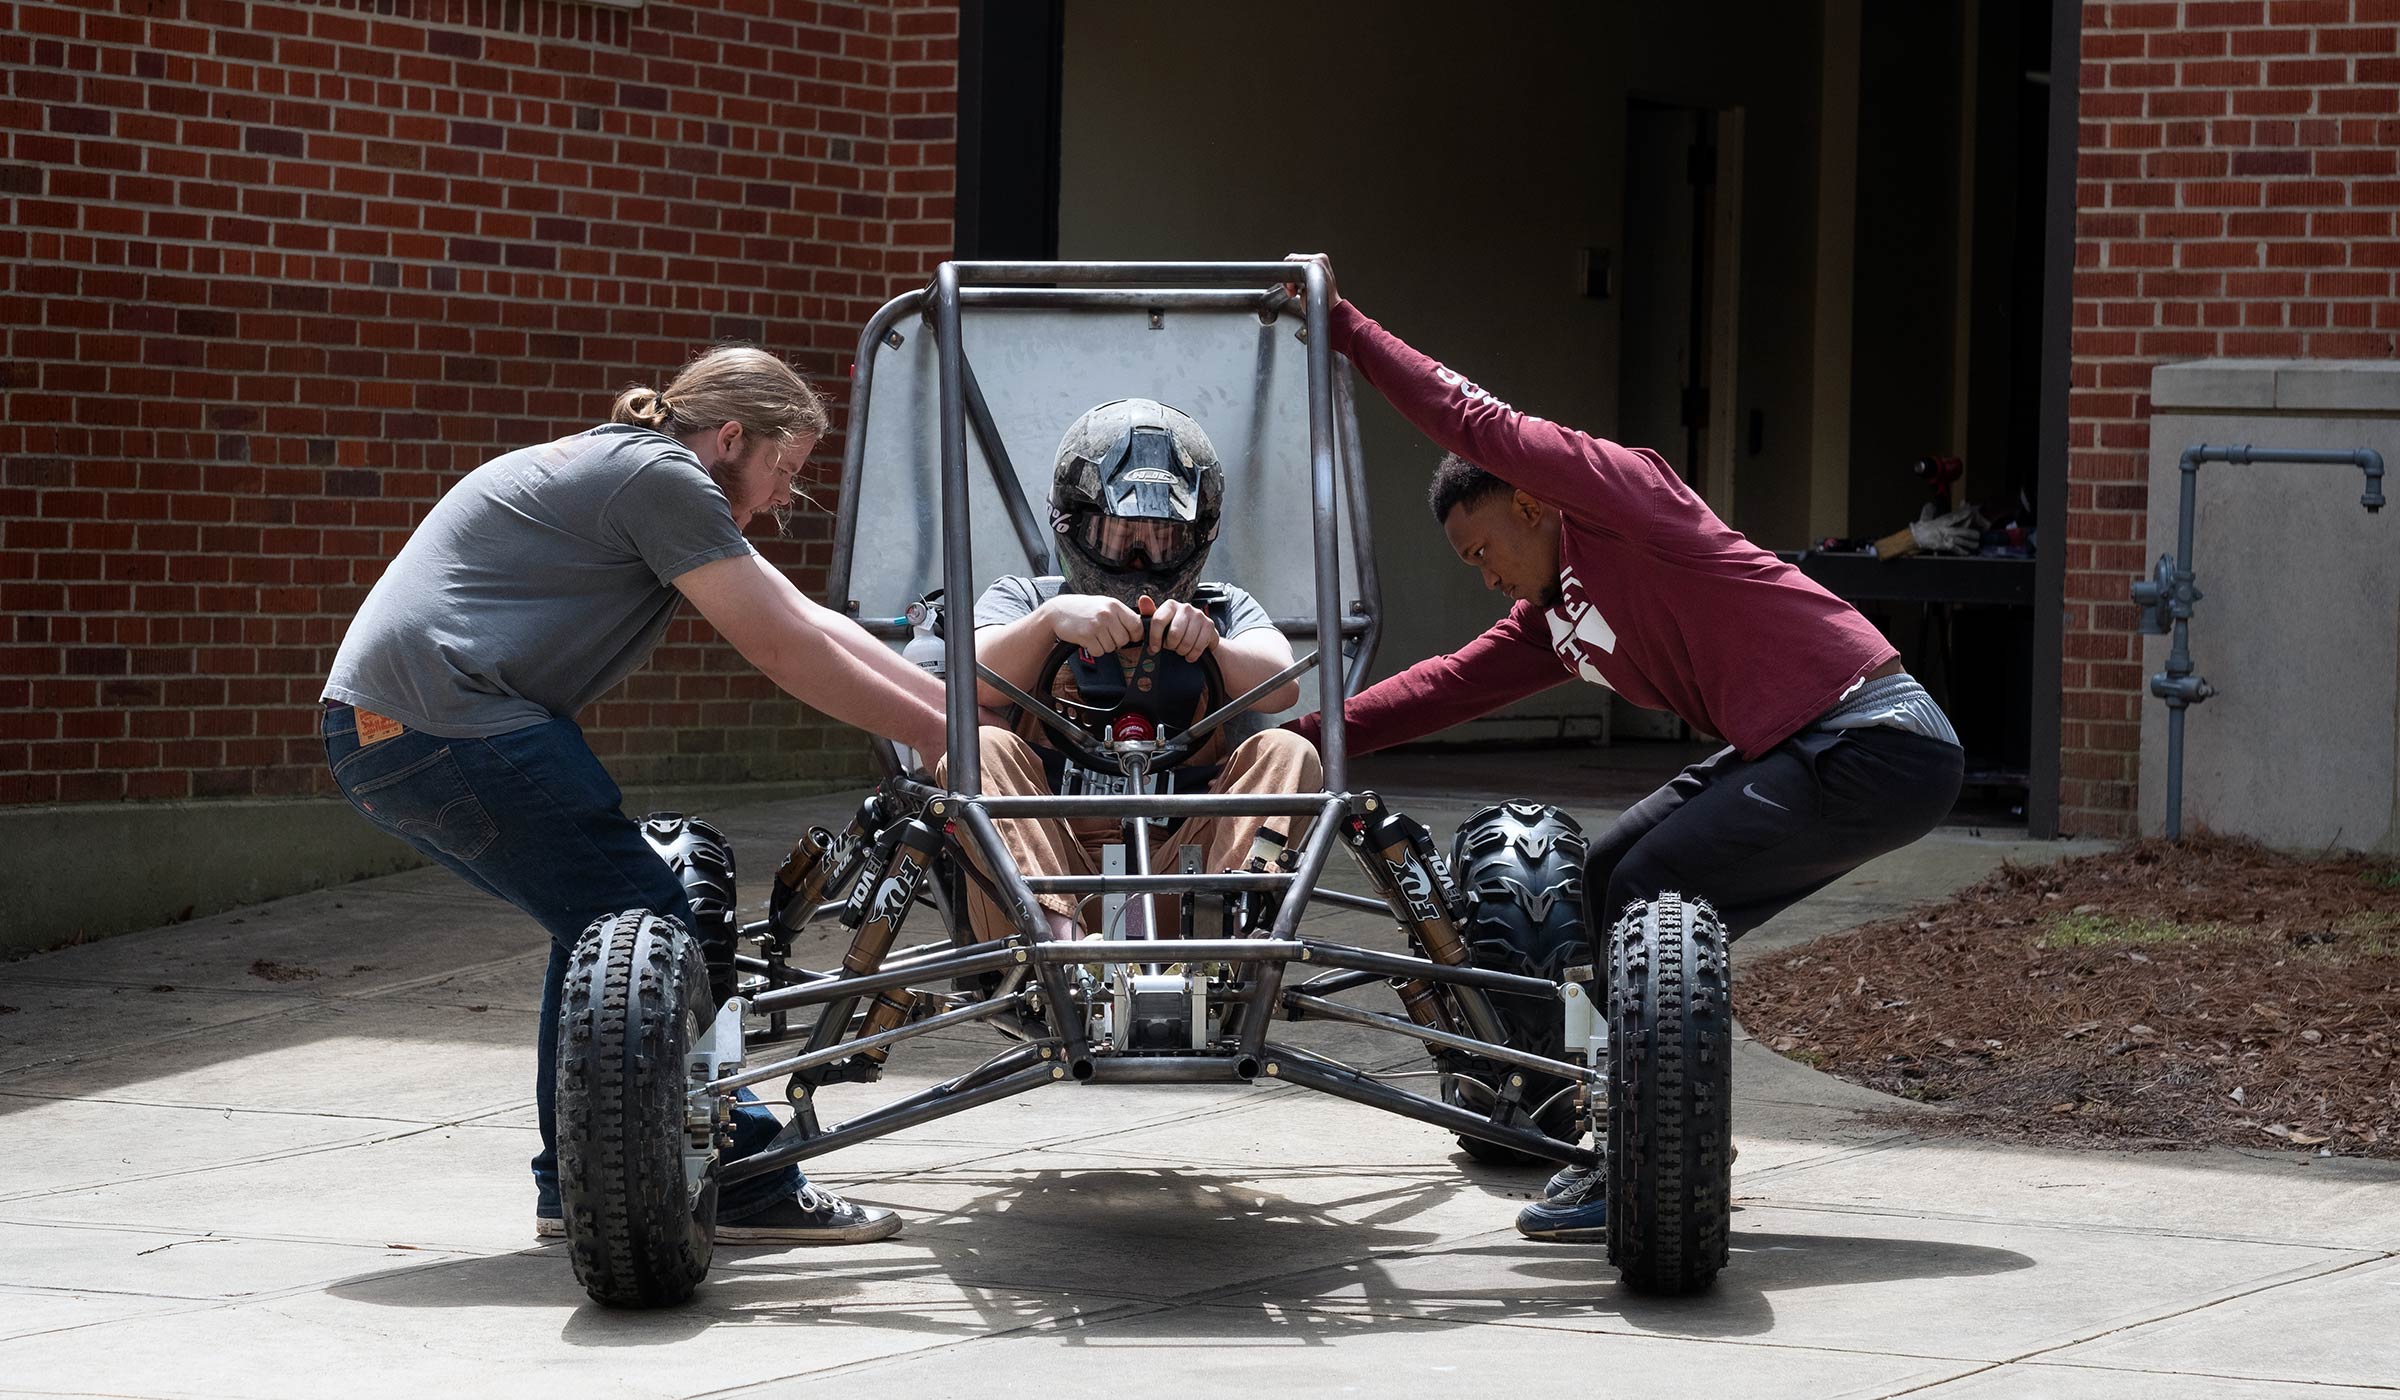 With a helmeted driver seated in the Baja car, two fellow Society of Automotive Engineers students pull on the seatbelt from either side to ready for the first drive.